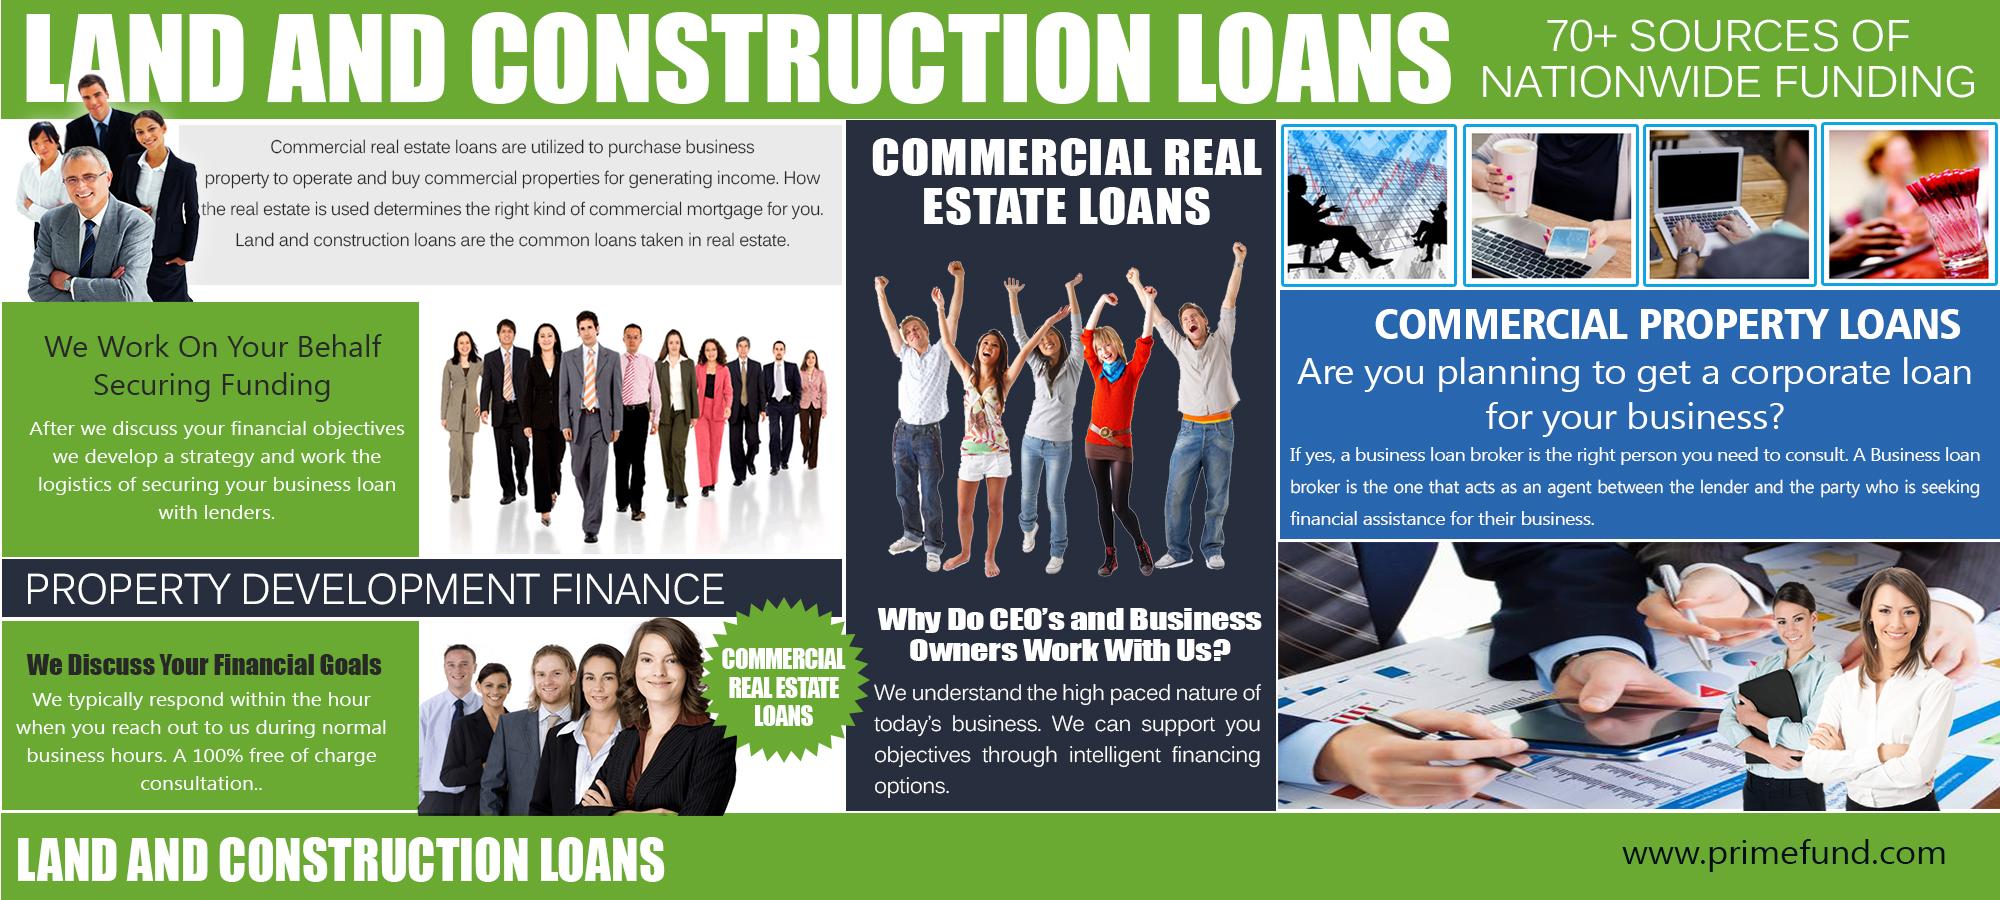 Land and Construction Loans